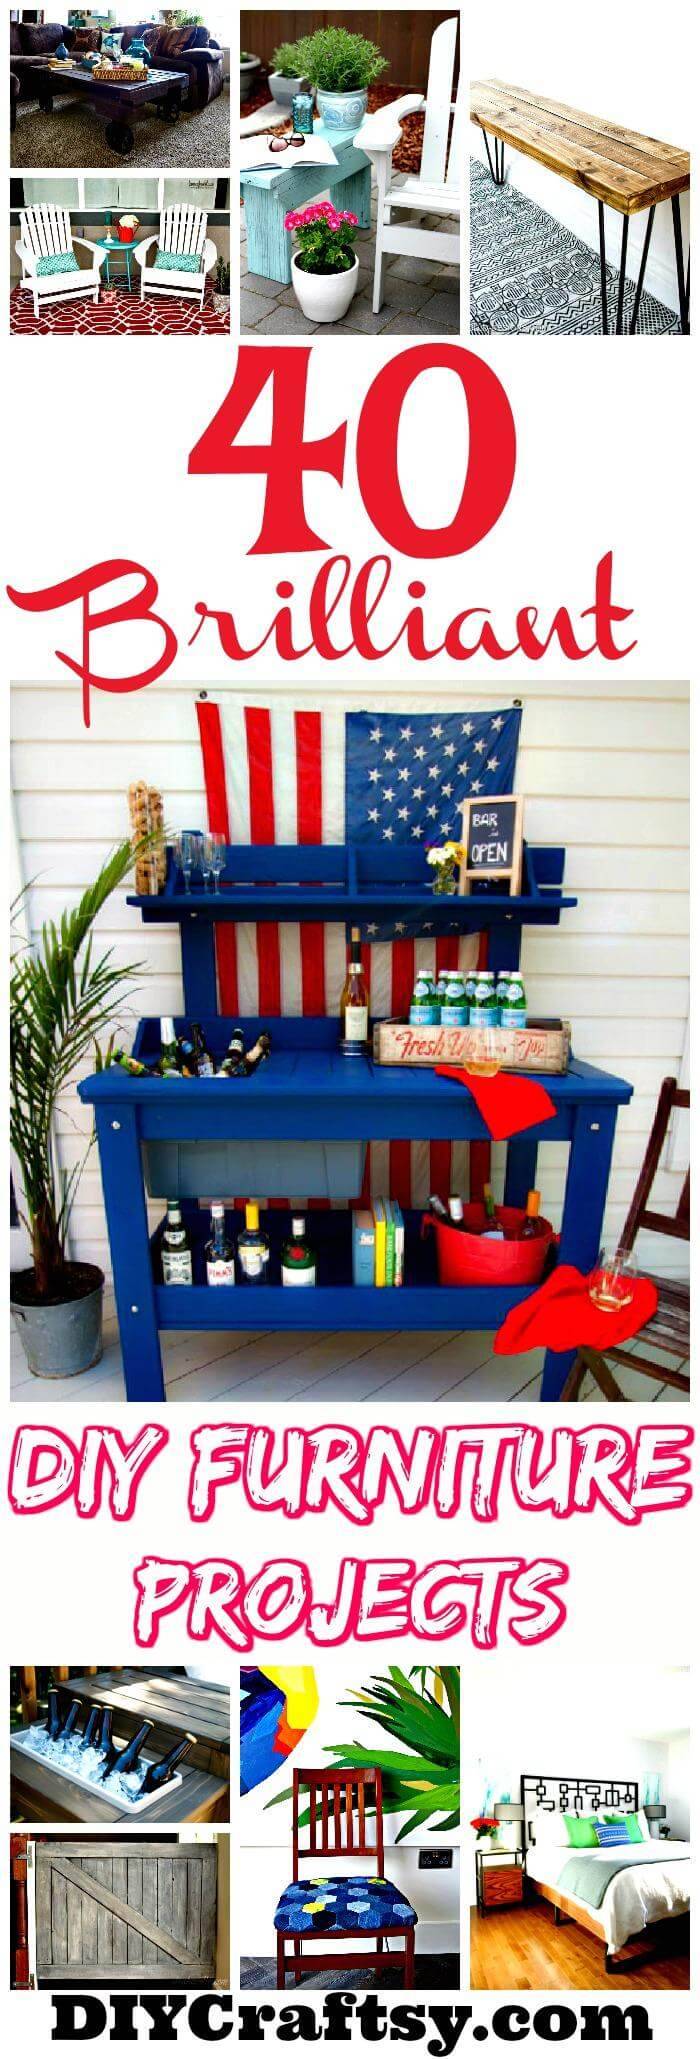 DIY Furniture Projects